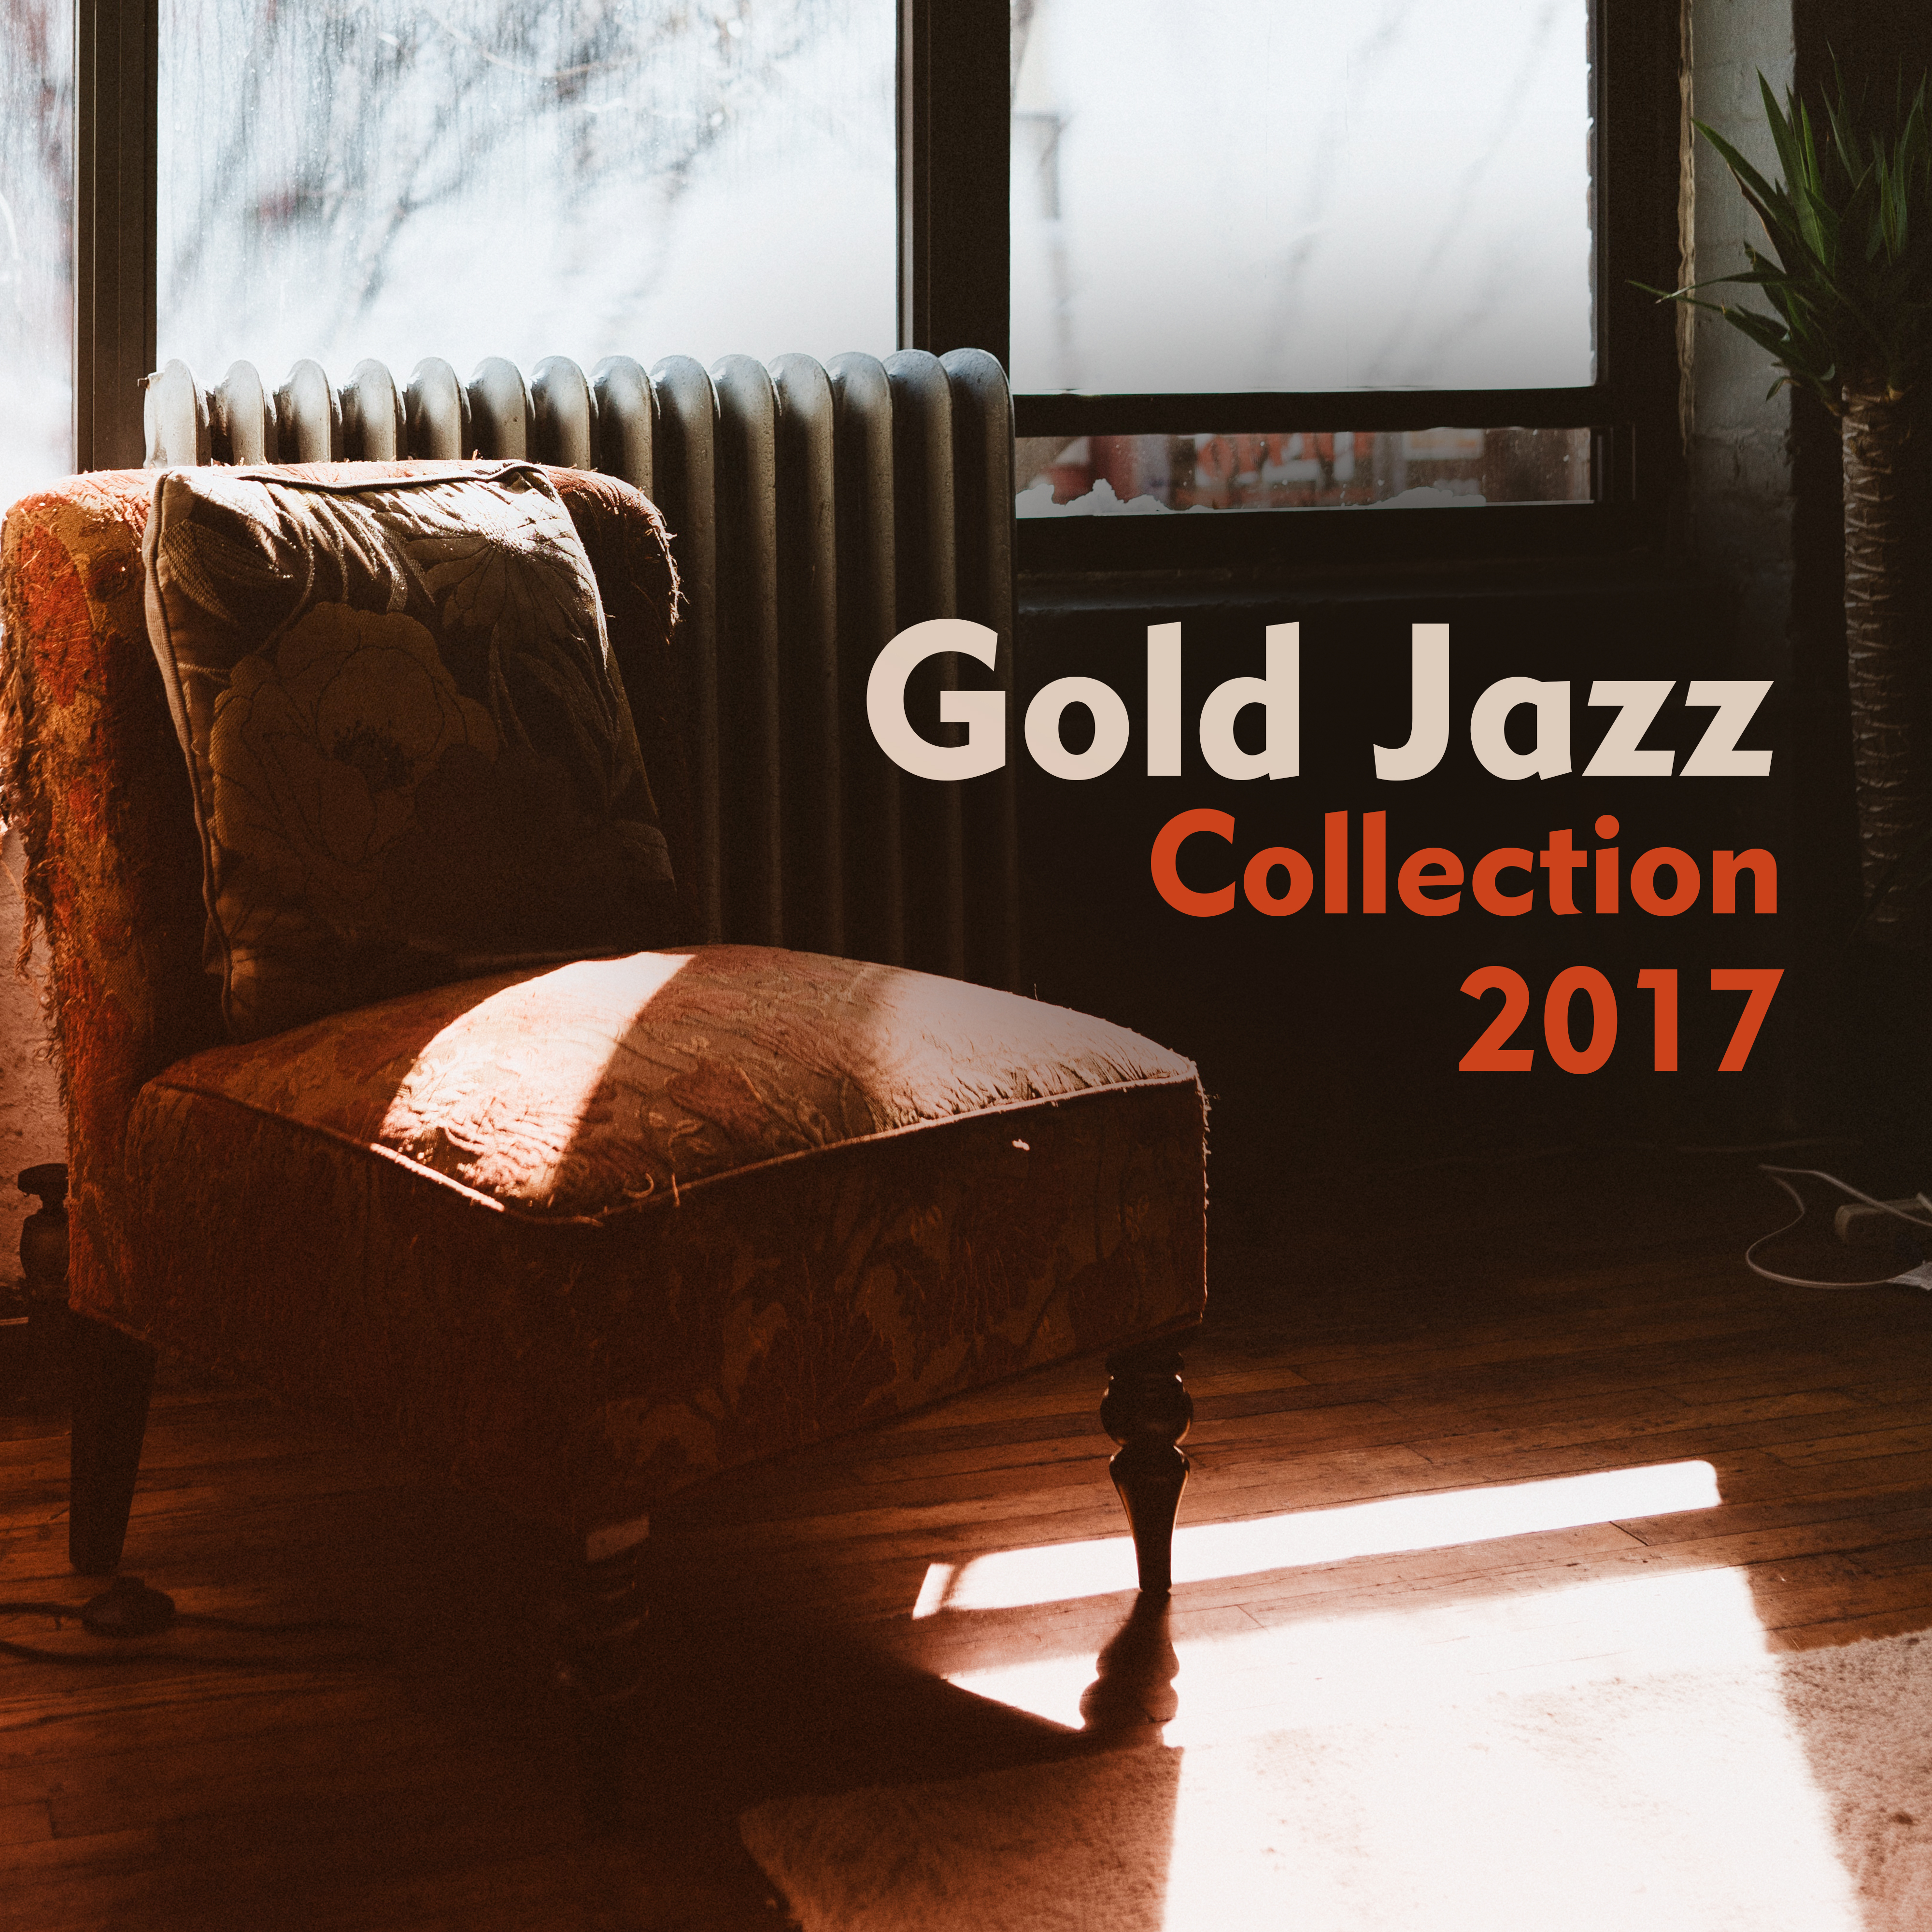 Gold Jazz Collection 2017